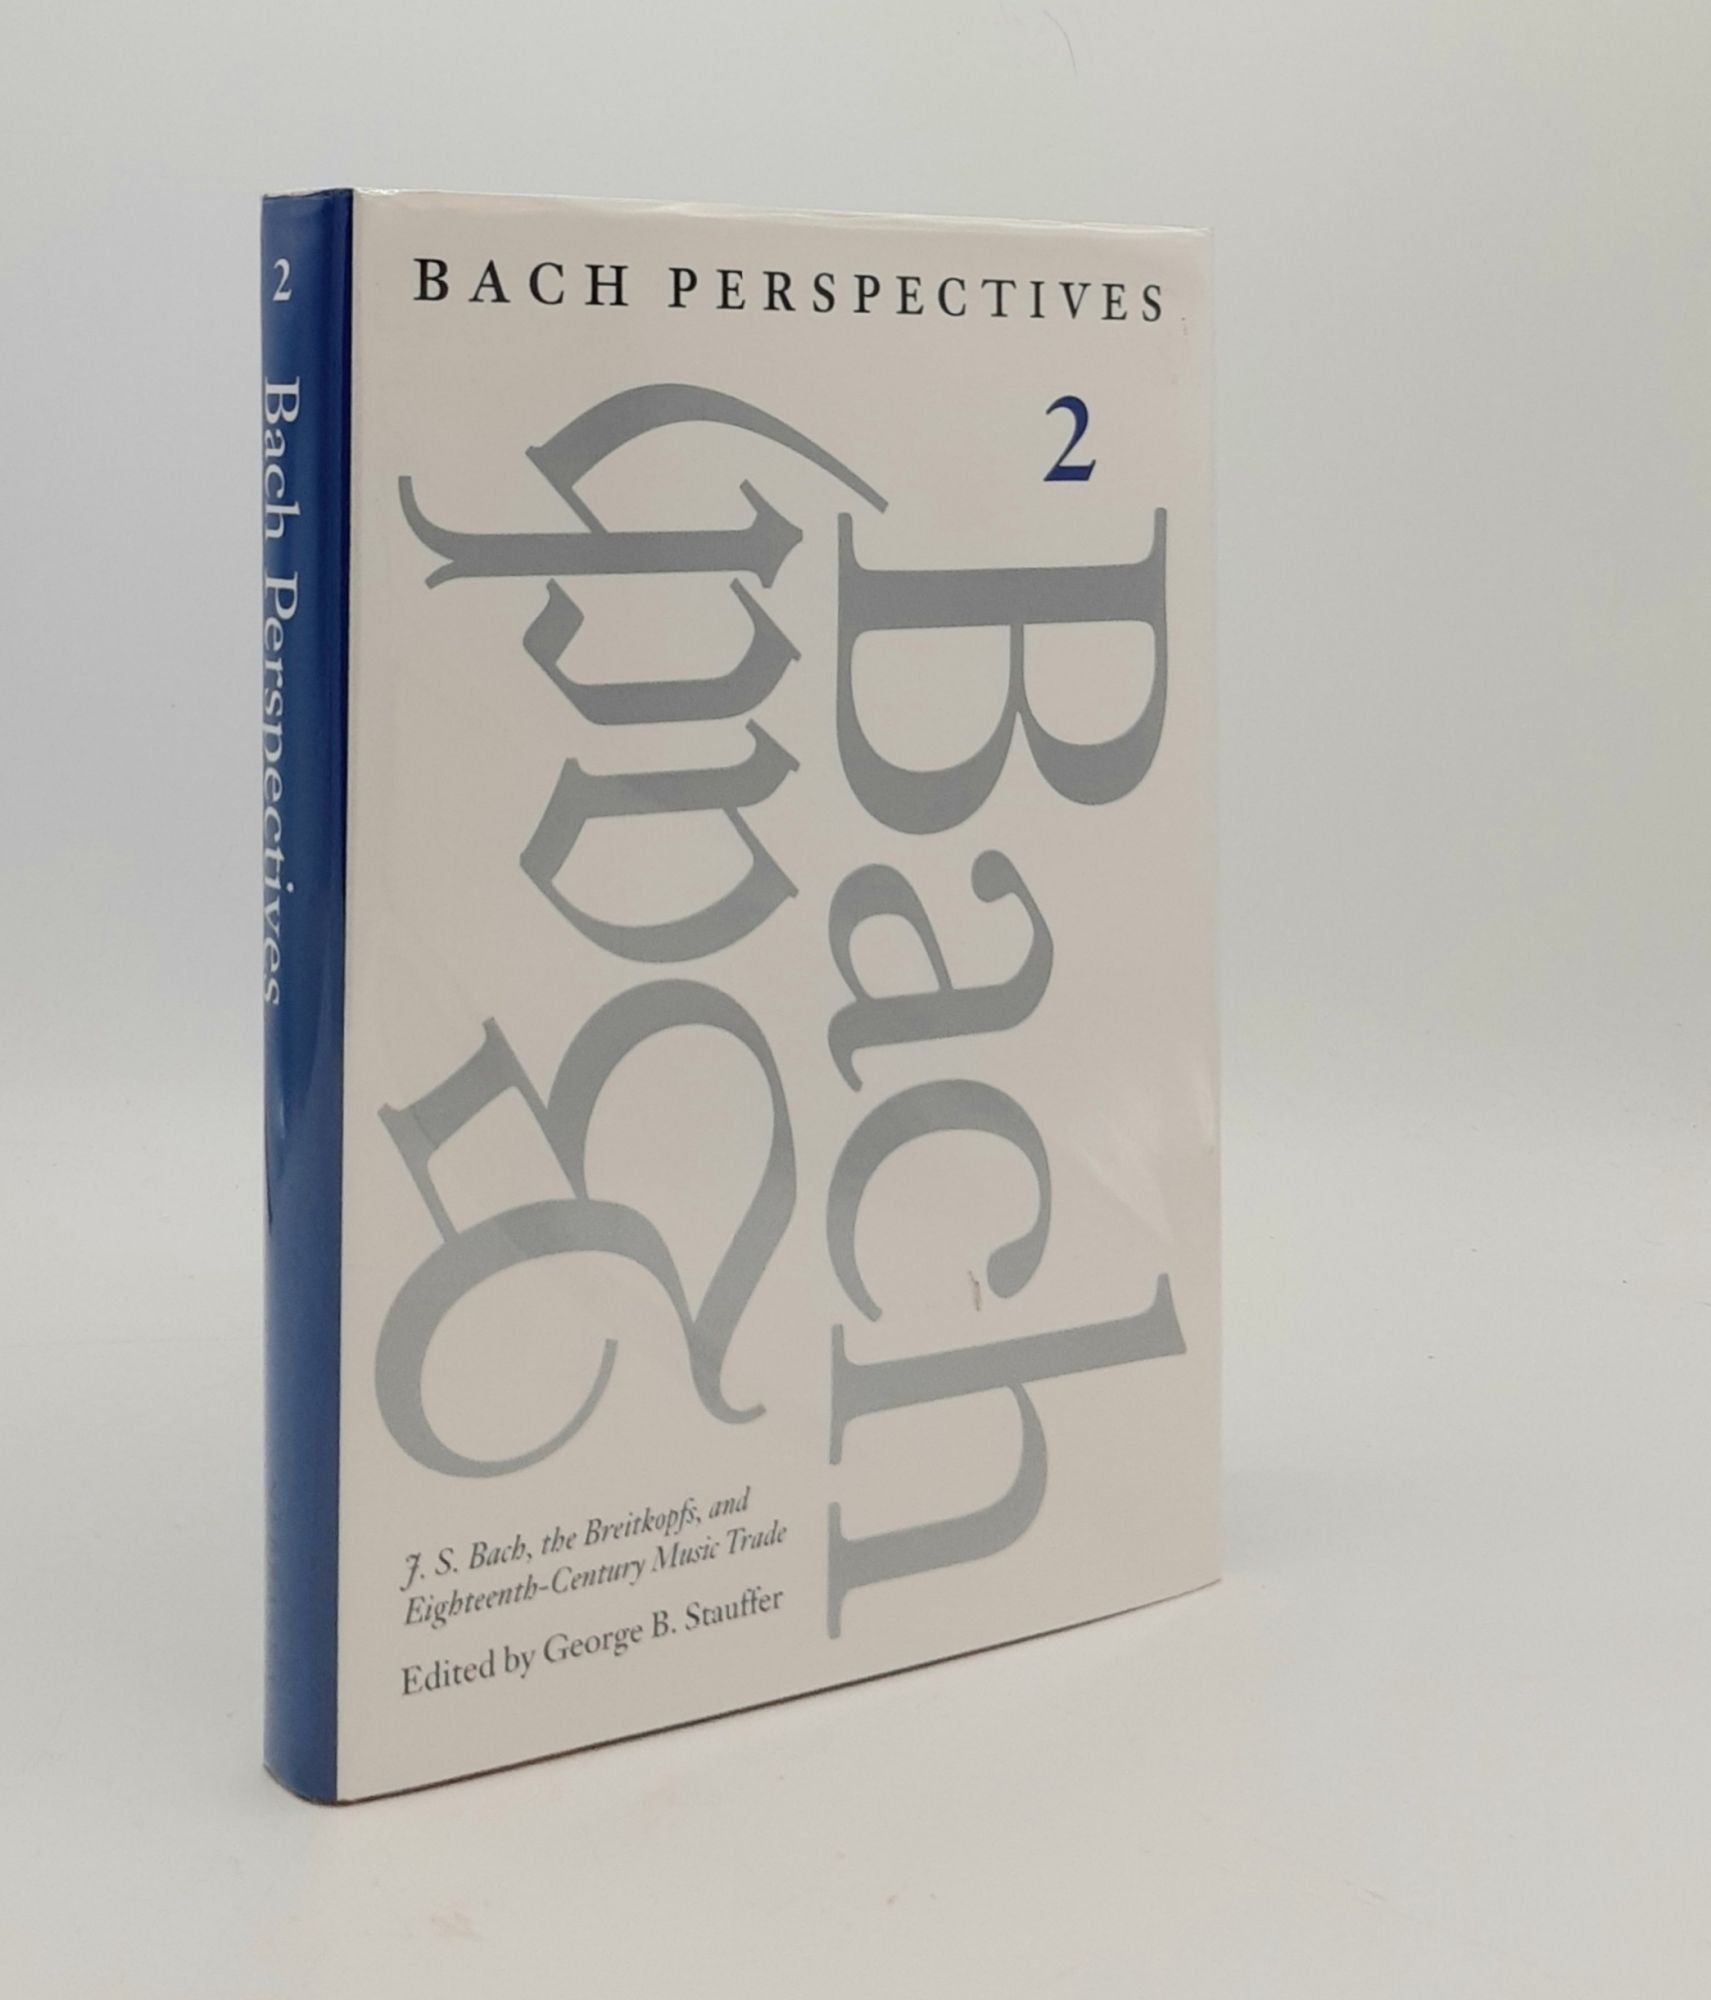 STAUFFER George B. - Bach Perspectives Volume Two J.S. Bach the Breitkopfs and Eighteenth-Century Music Trade